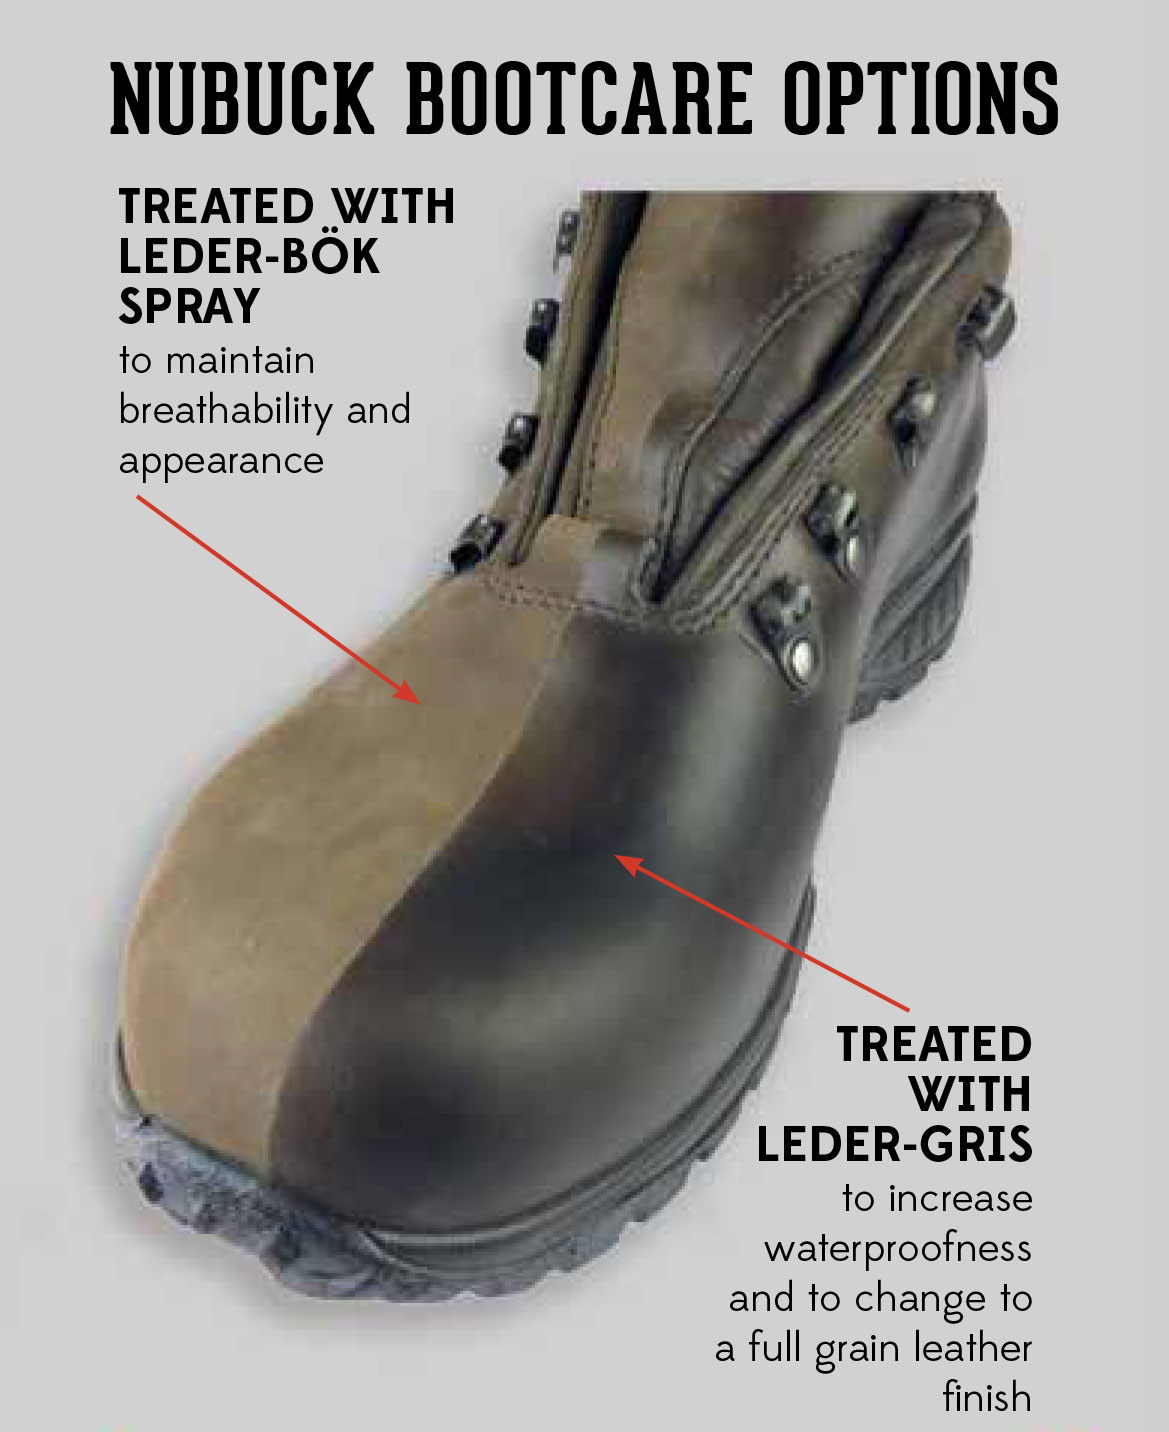 How To Clean Nubuck Boots | peacecommission.kdsg.gov.ng